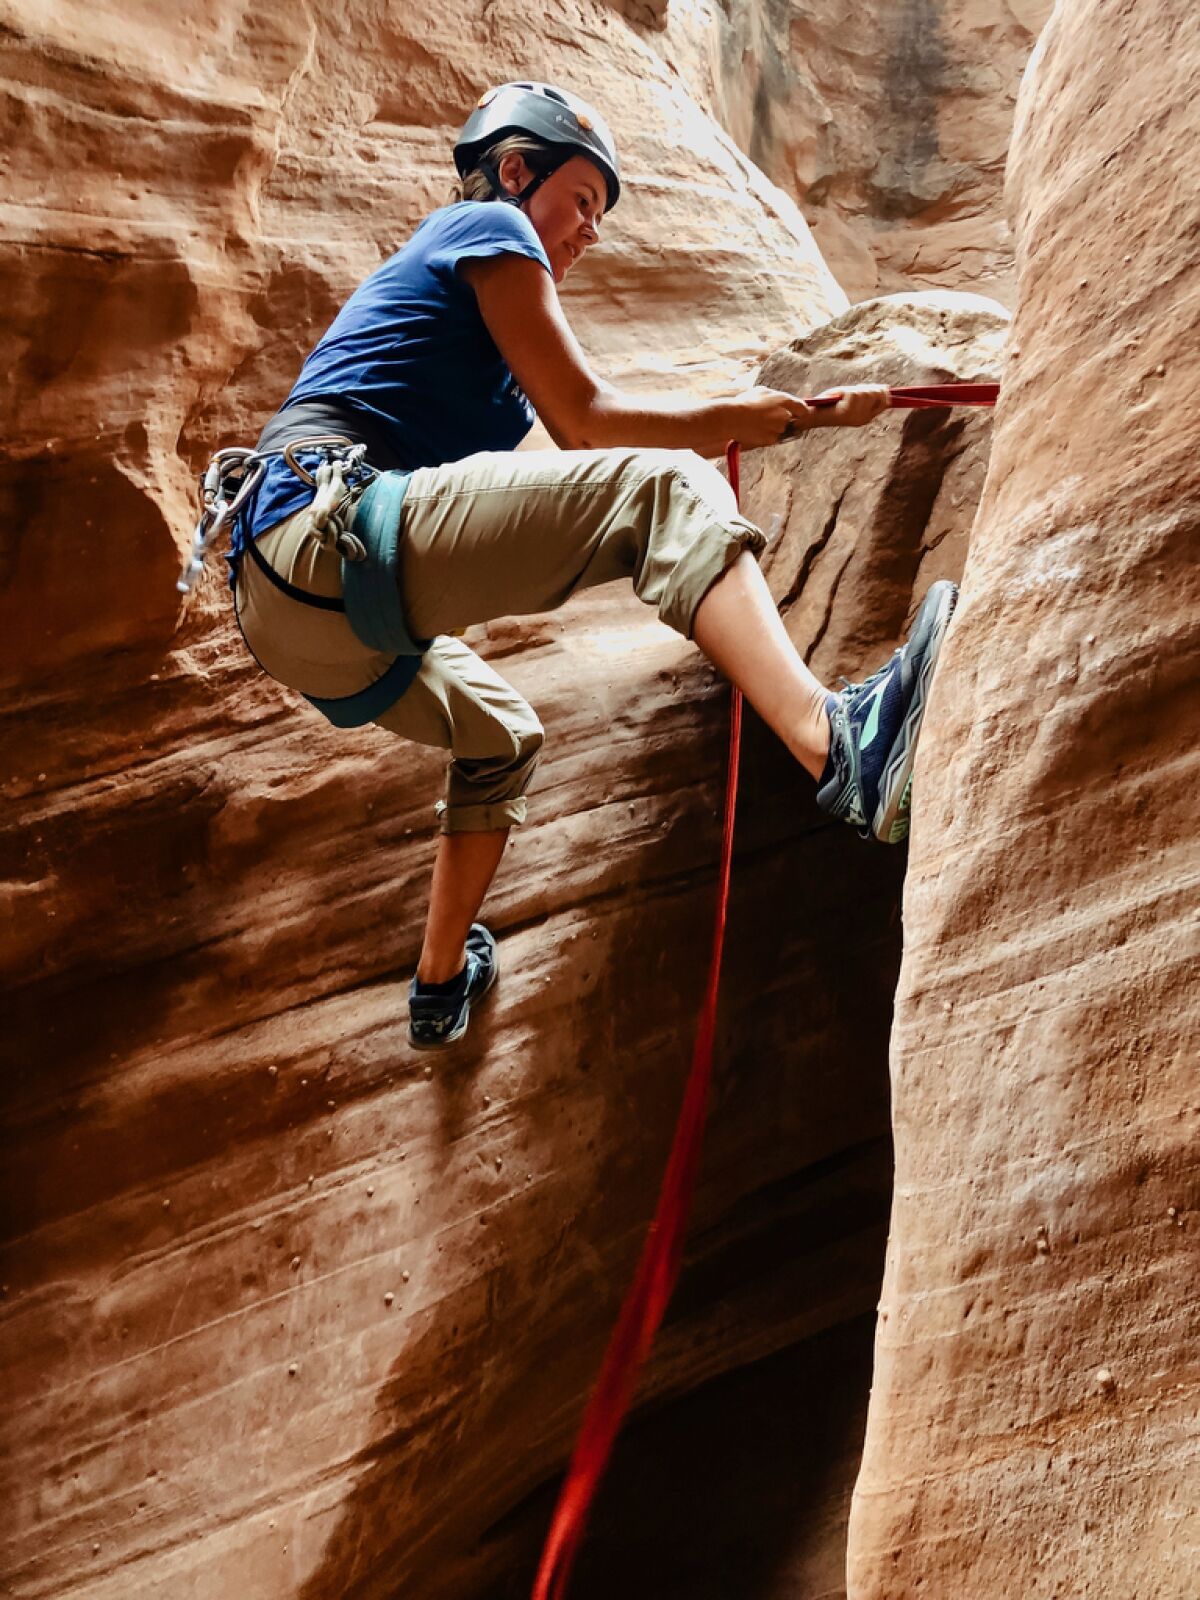 A woman climbs the wall of a slot canyon.